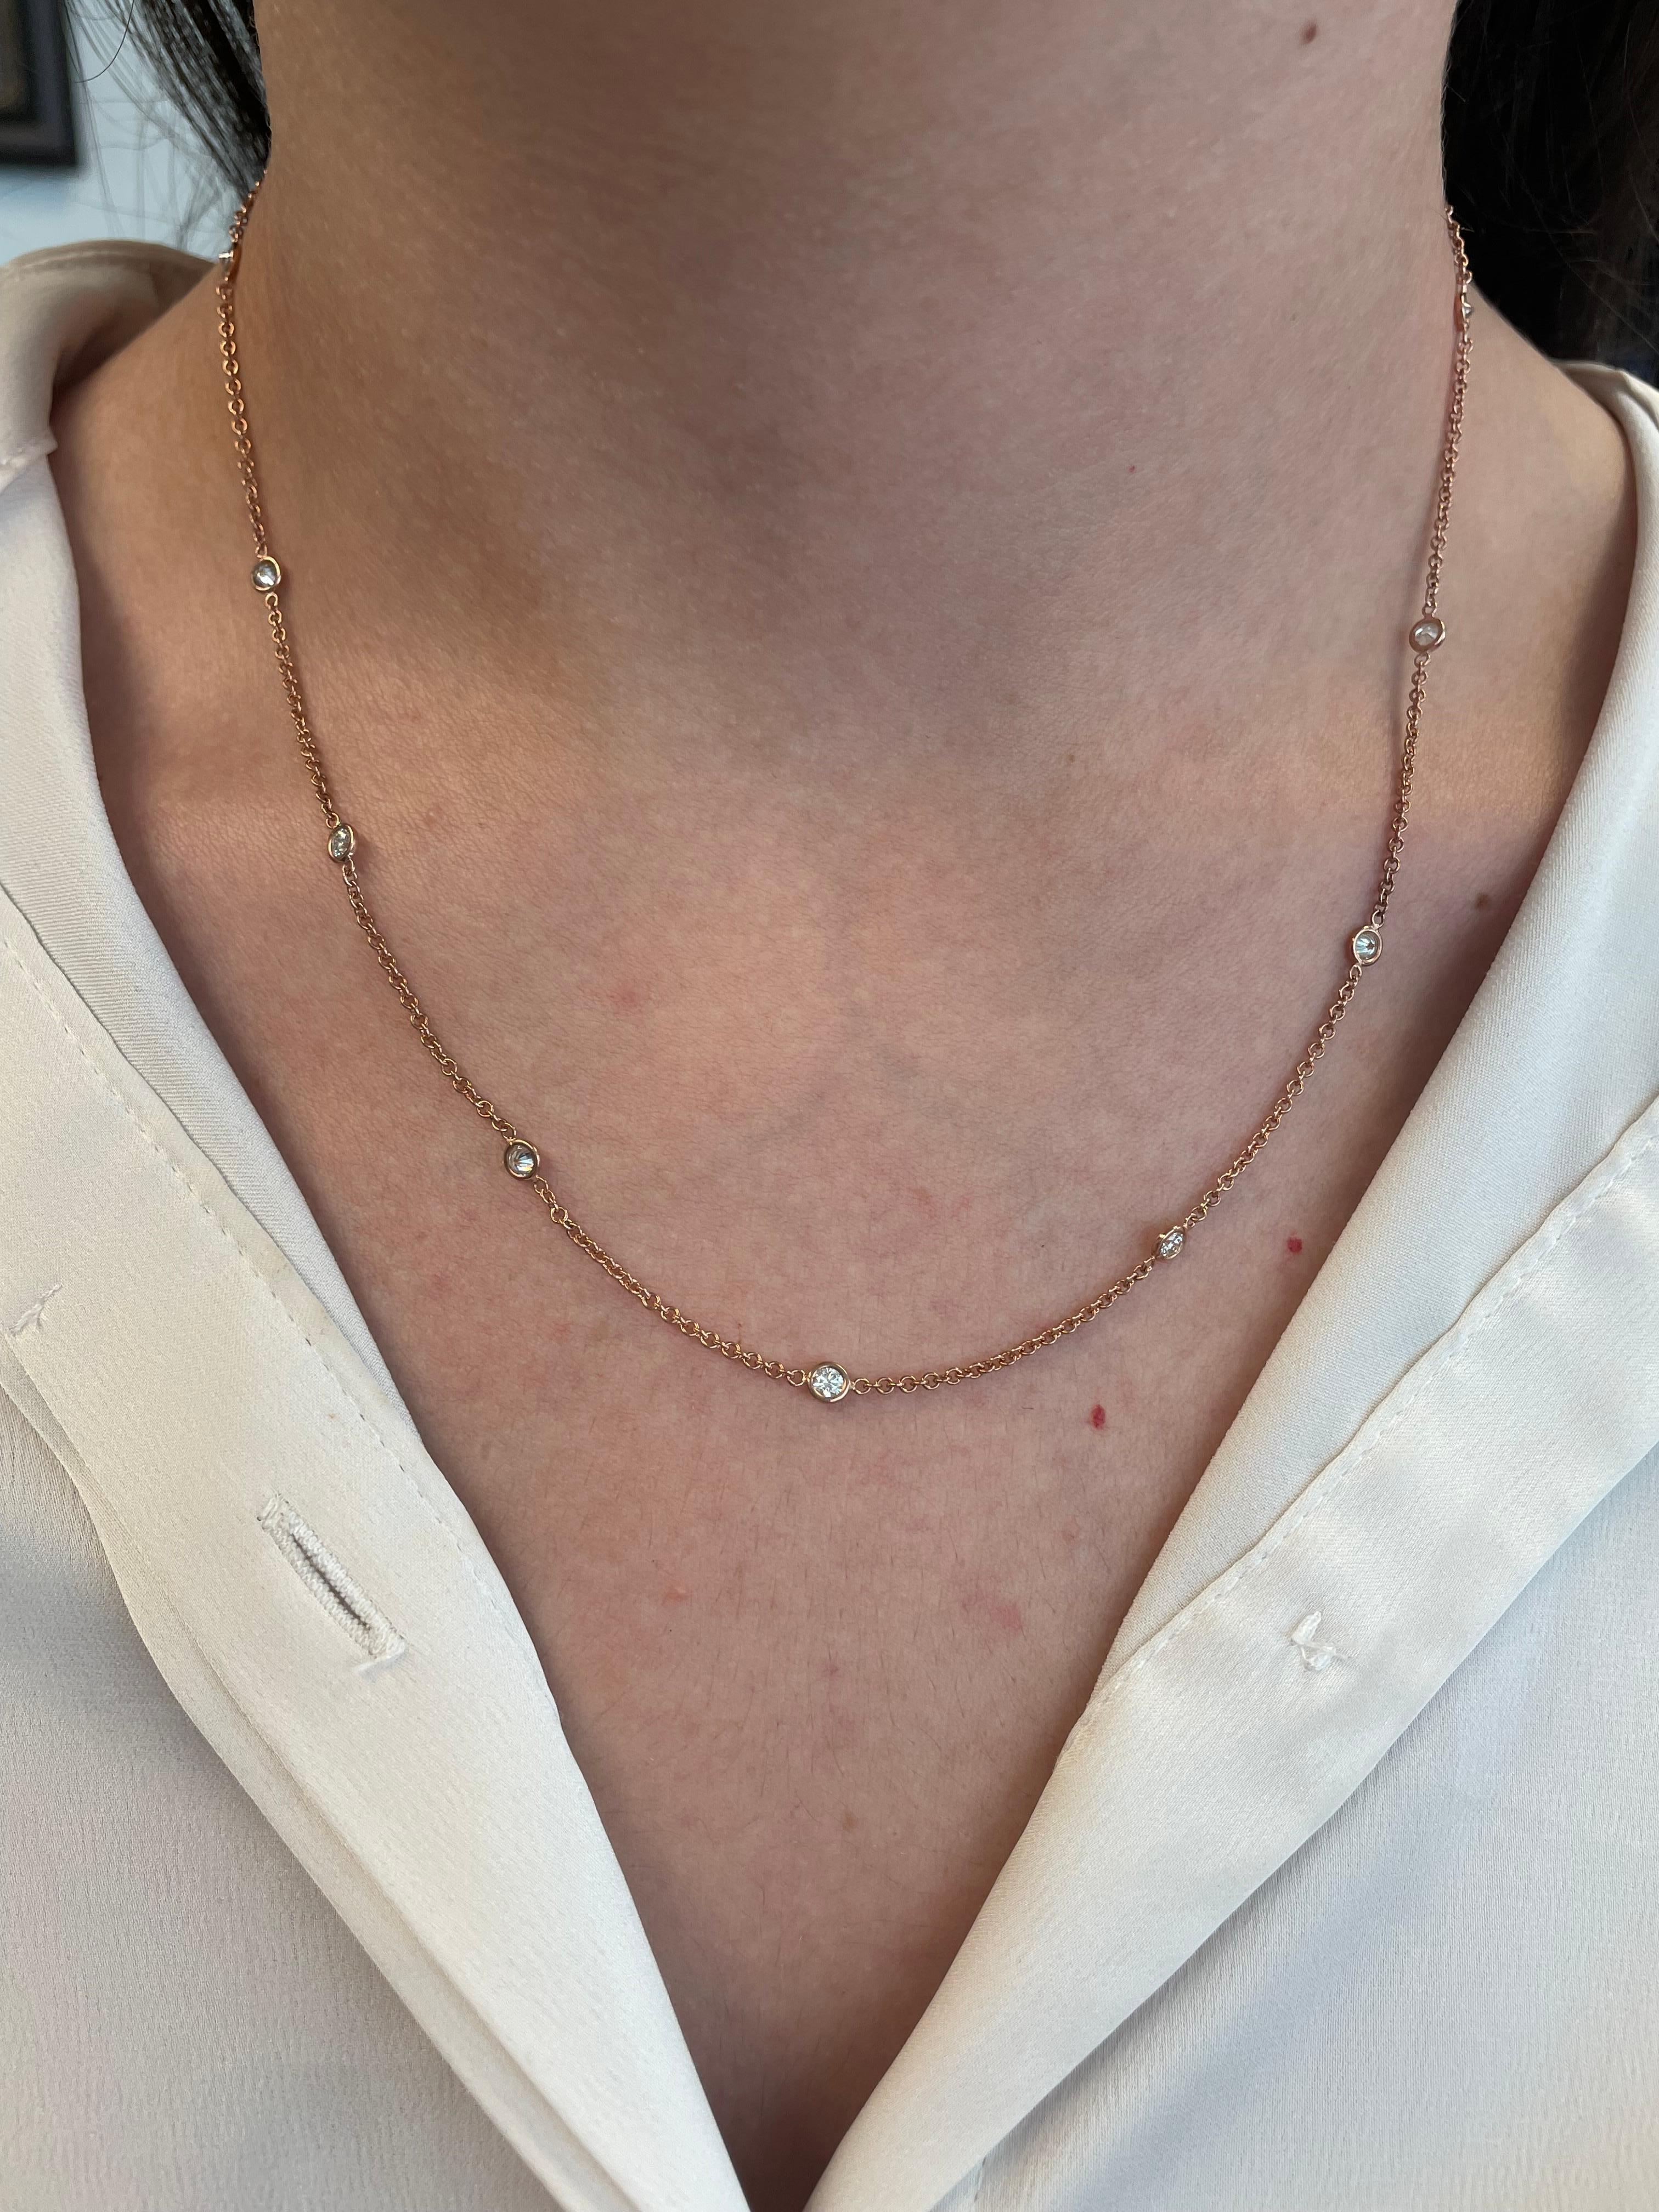 Exquisite round brilliant diamonds by the yard modern necklace. By Alexander Beverly Hills.
12 round brilliant diamonds, 0.93 carats total. Approximately G/H color and SI clarity. Bezel set in 18k rose gold, 3.60 grams. 
Accommodated with an